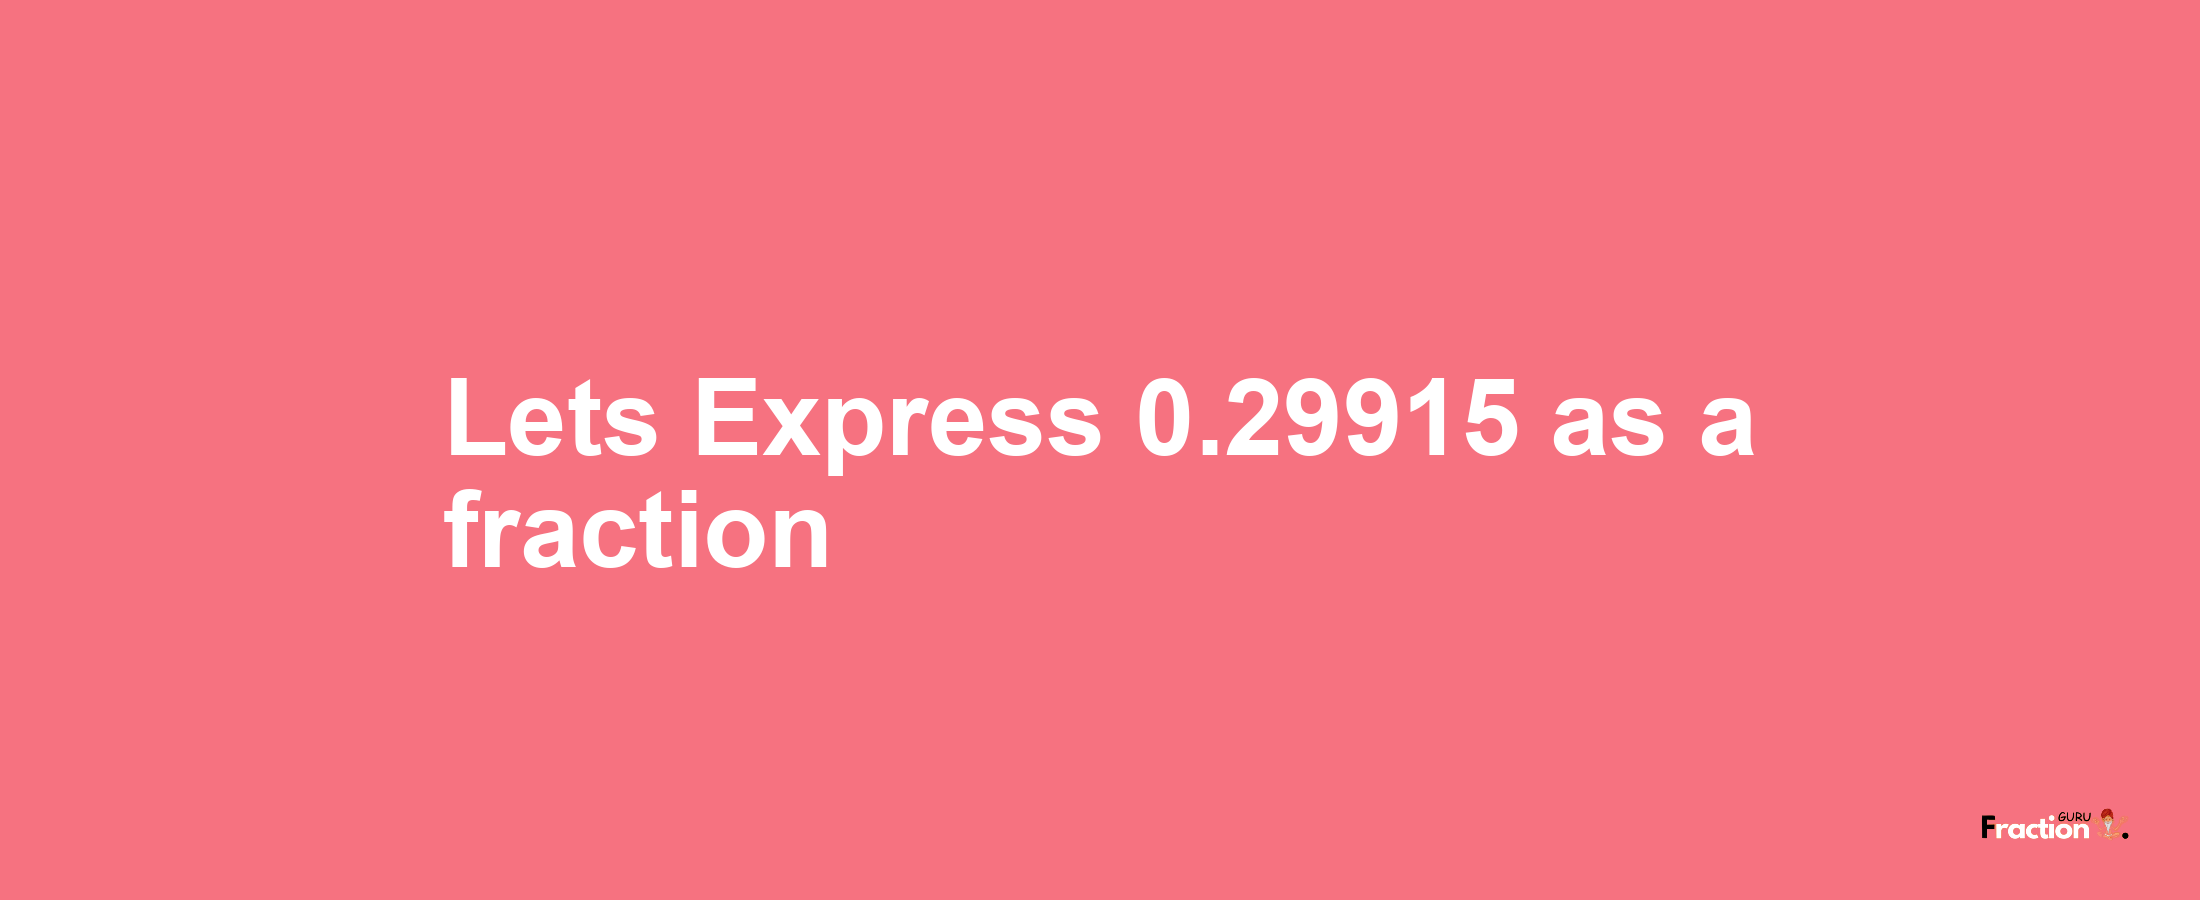 Lets Express 0.29915 as afraction